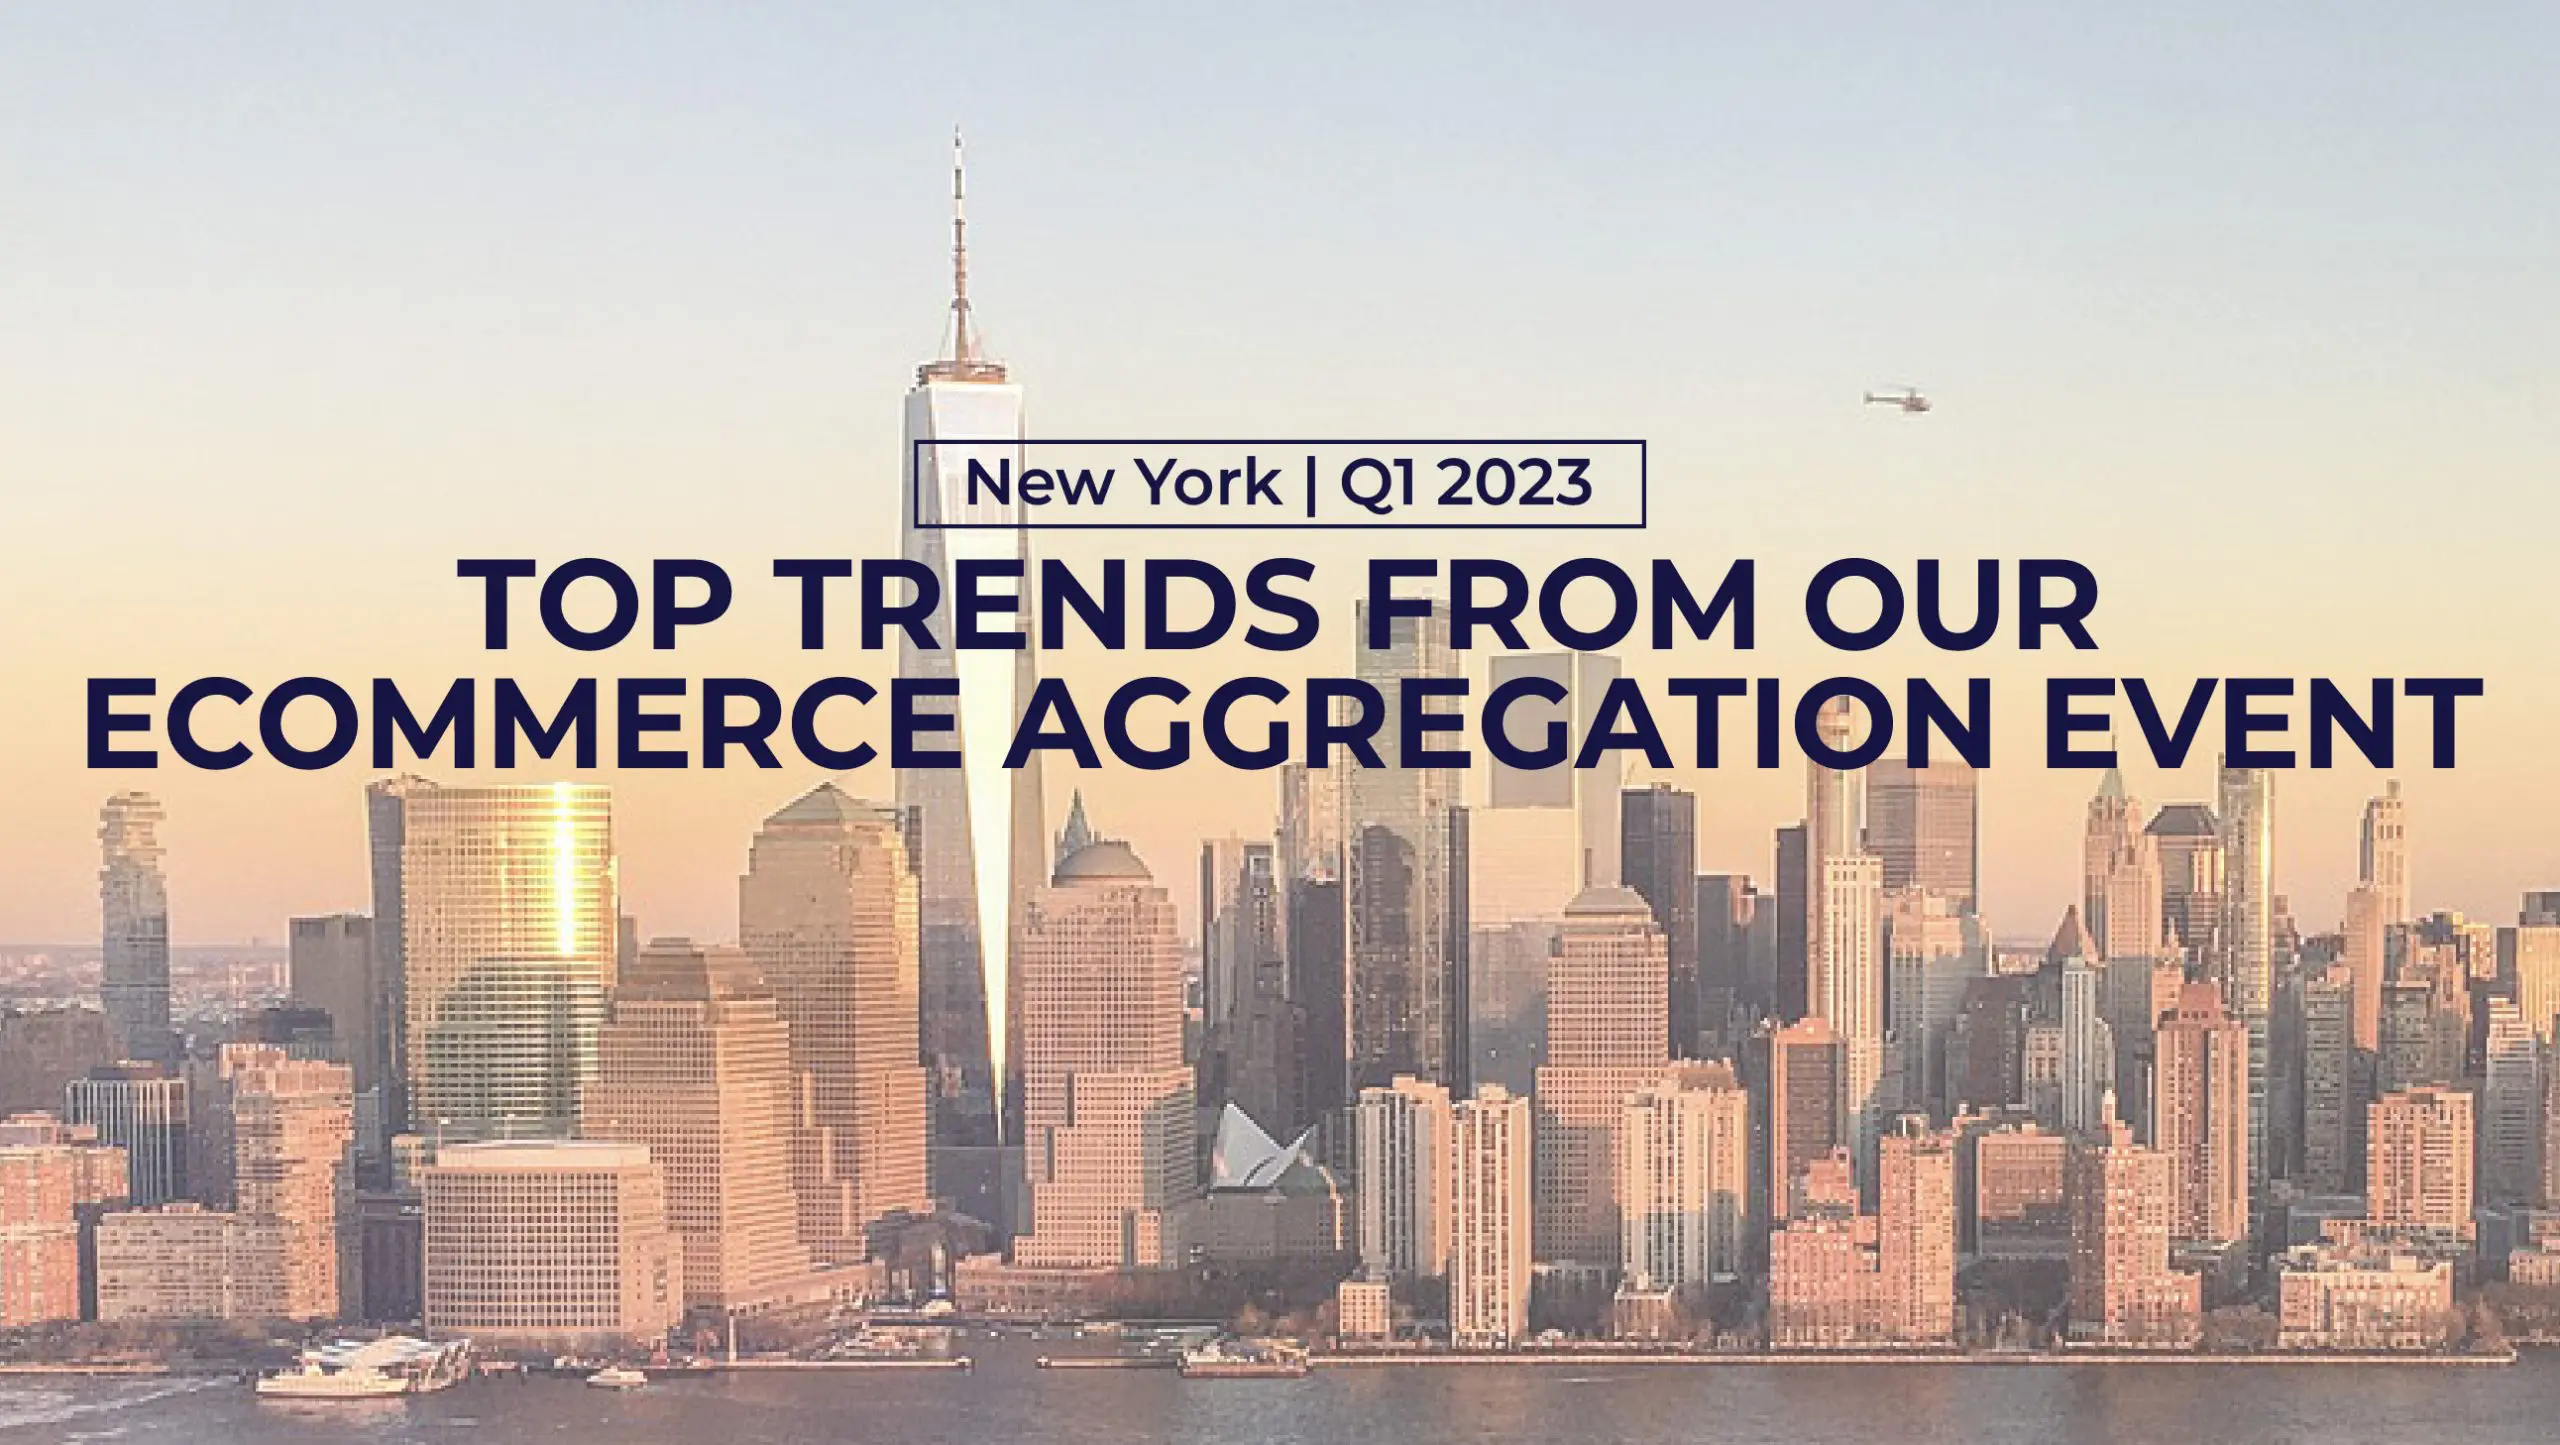 Top Trends from Our eCommerce Aggregation Event [New York Q1 2023]